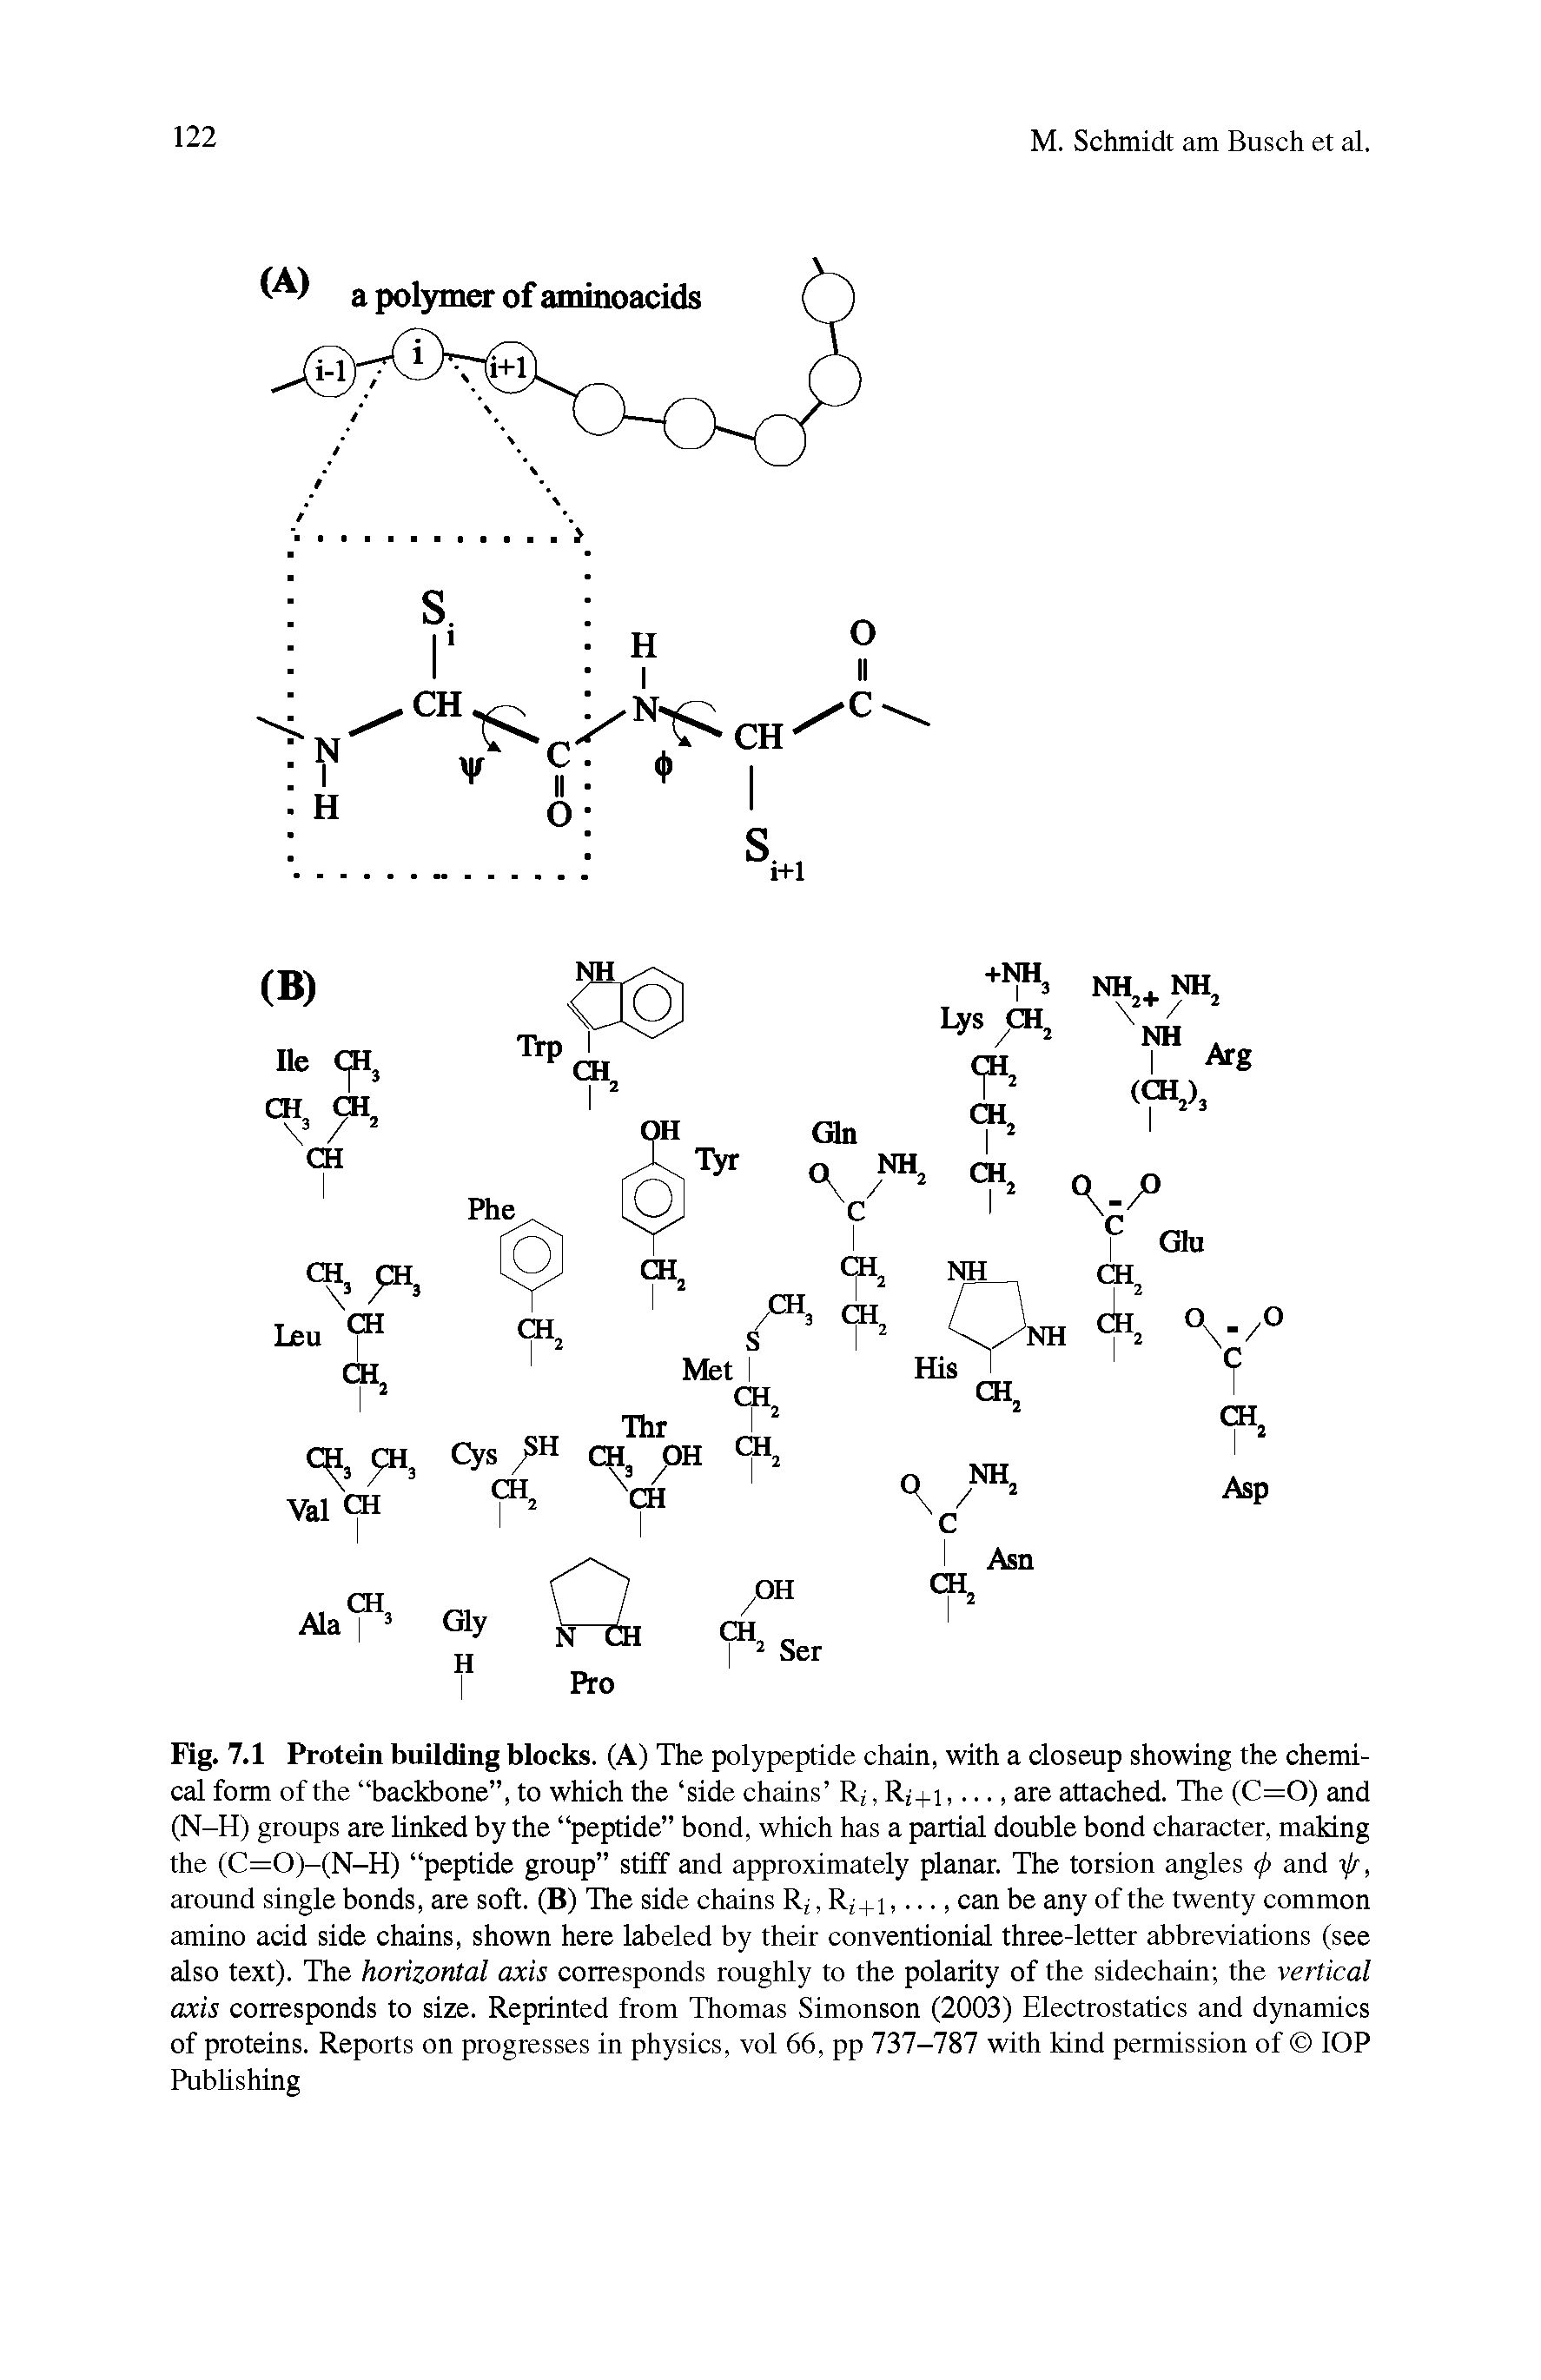 Fig. 7.1 Protein building blocks. (A) The polypeptide chain, with a closeup showing the chemical form of the backbone , to which the side chains R , R +i,..., are attached. The (C=0) and (N-H) groups are linked by the peptide bond, which has a partial double bond character, making the (C=0)-(N-H) peptide group stiff and approximately planar. The torsion angles tj) and tfr, around single bonds, are soft. (B) The side chains R , R +i,..., can be any of the twenty common amino acid side chains, shown here labeled by their conventionial three-letter abbreviations (see also text). The horizontal axis corresponds roughly to the polarity of the sidechain the vertical axis corresponds to size. Reprinted from Thomas Simonson (2003) Electrostatics and dynamics of proteins. Reports on progresses in physics, vol 66, pp 737-787 with kind permission of lOP Pubhshing...